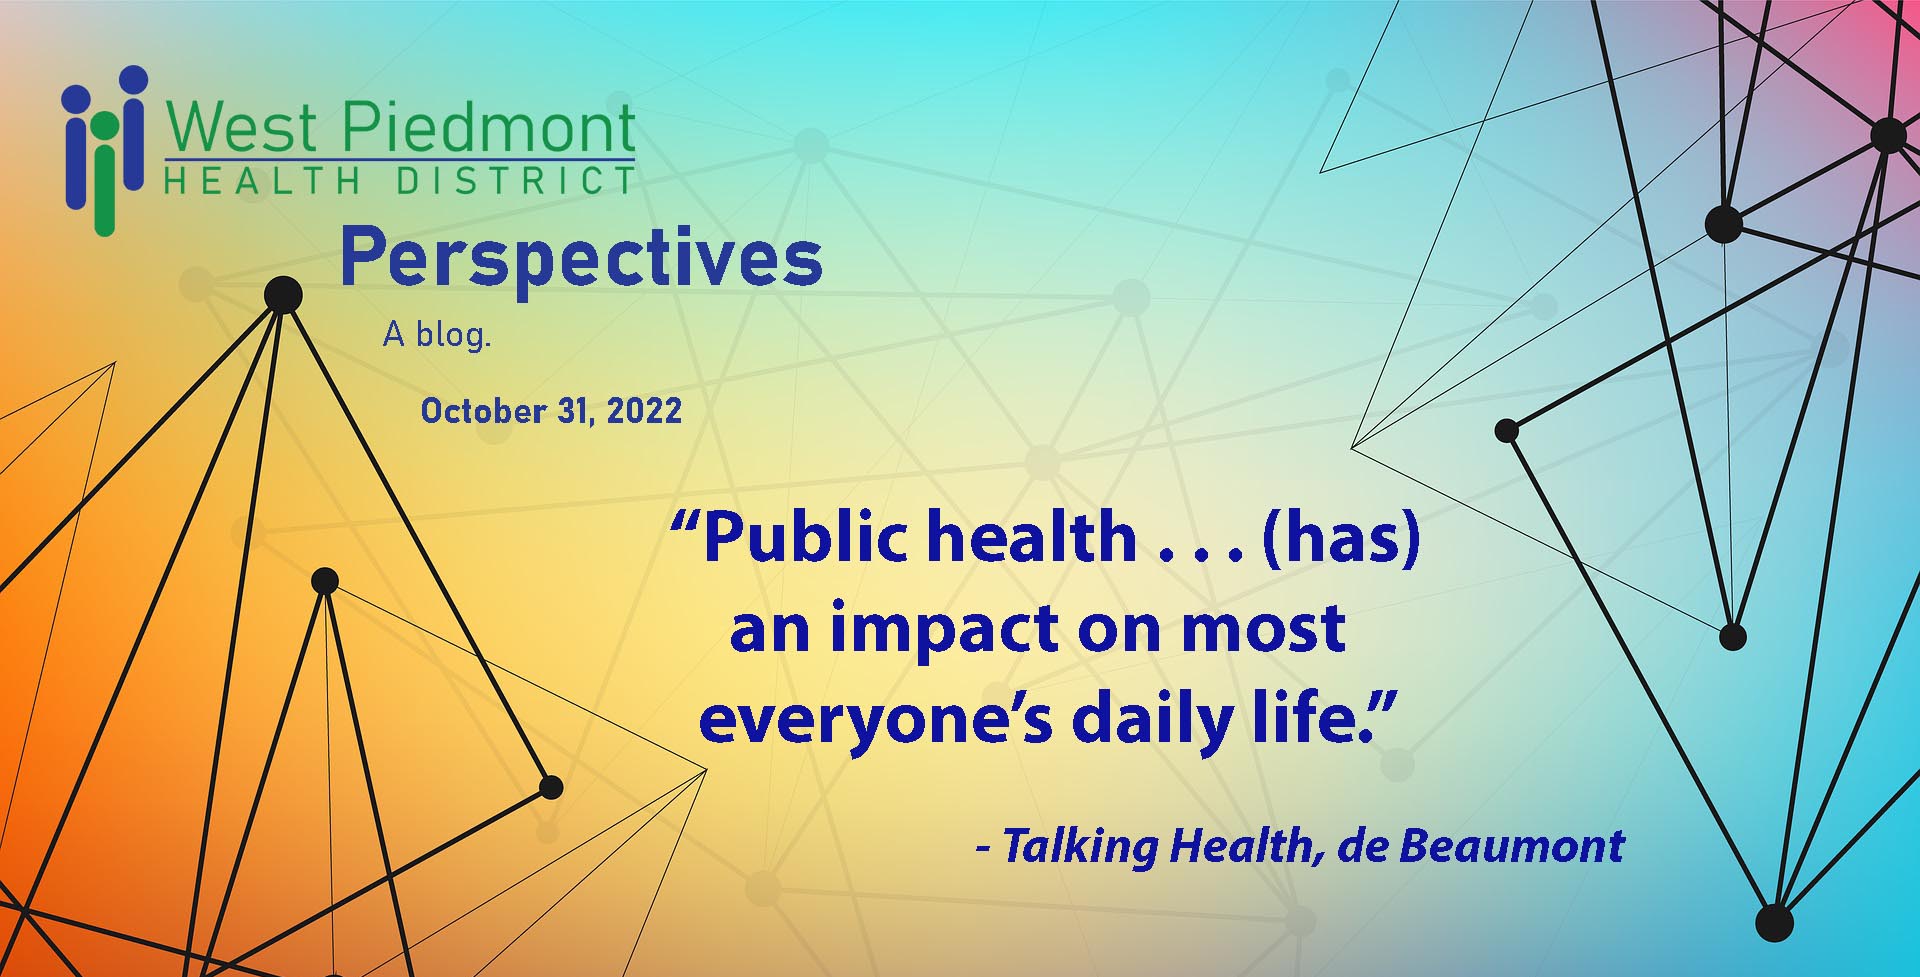 WP Perspectives cover quote: Public health has an impact on most everyone's daily life."